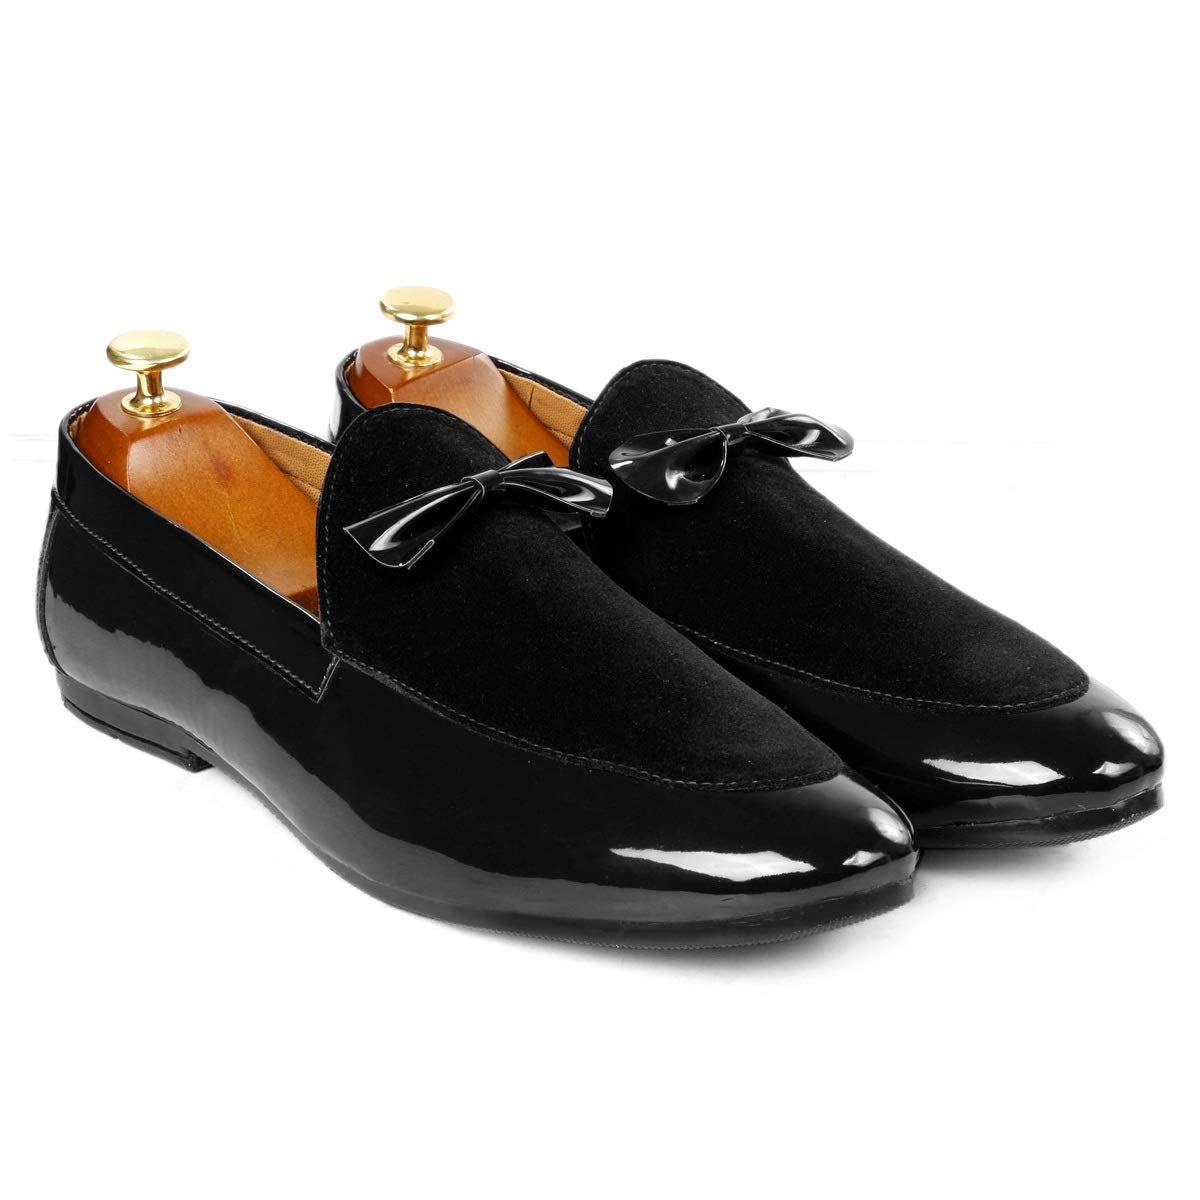 Classic Design Wedding And Party Wear Loafer & Moccasins Shoes For Men's-Unique and Classy